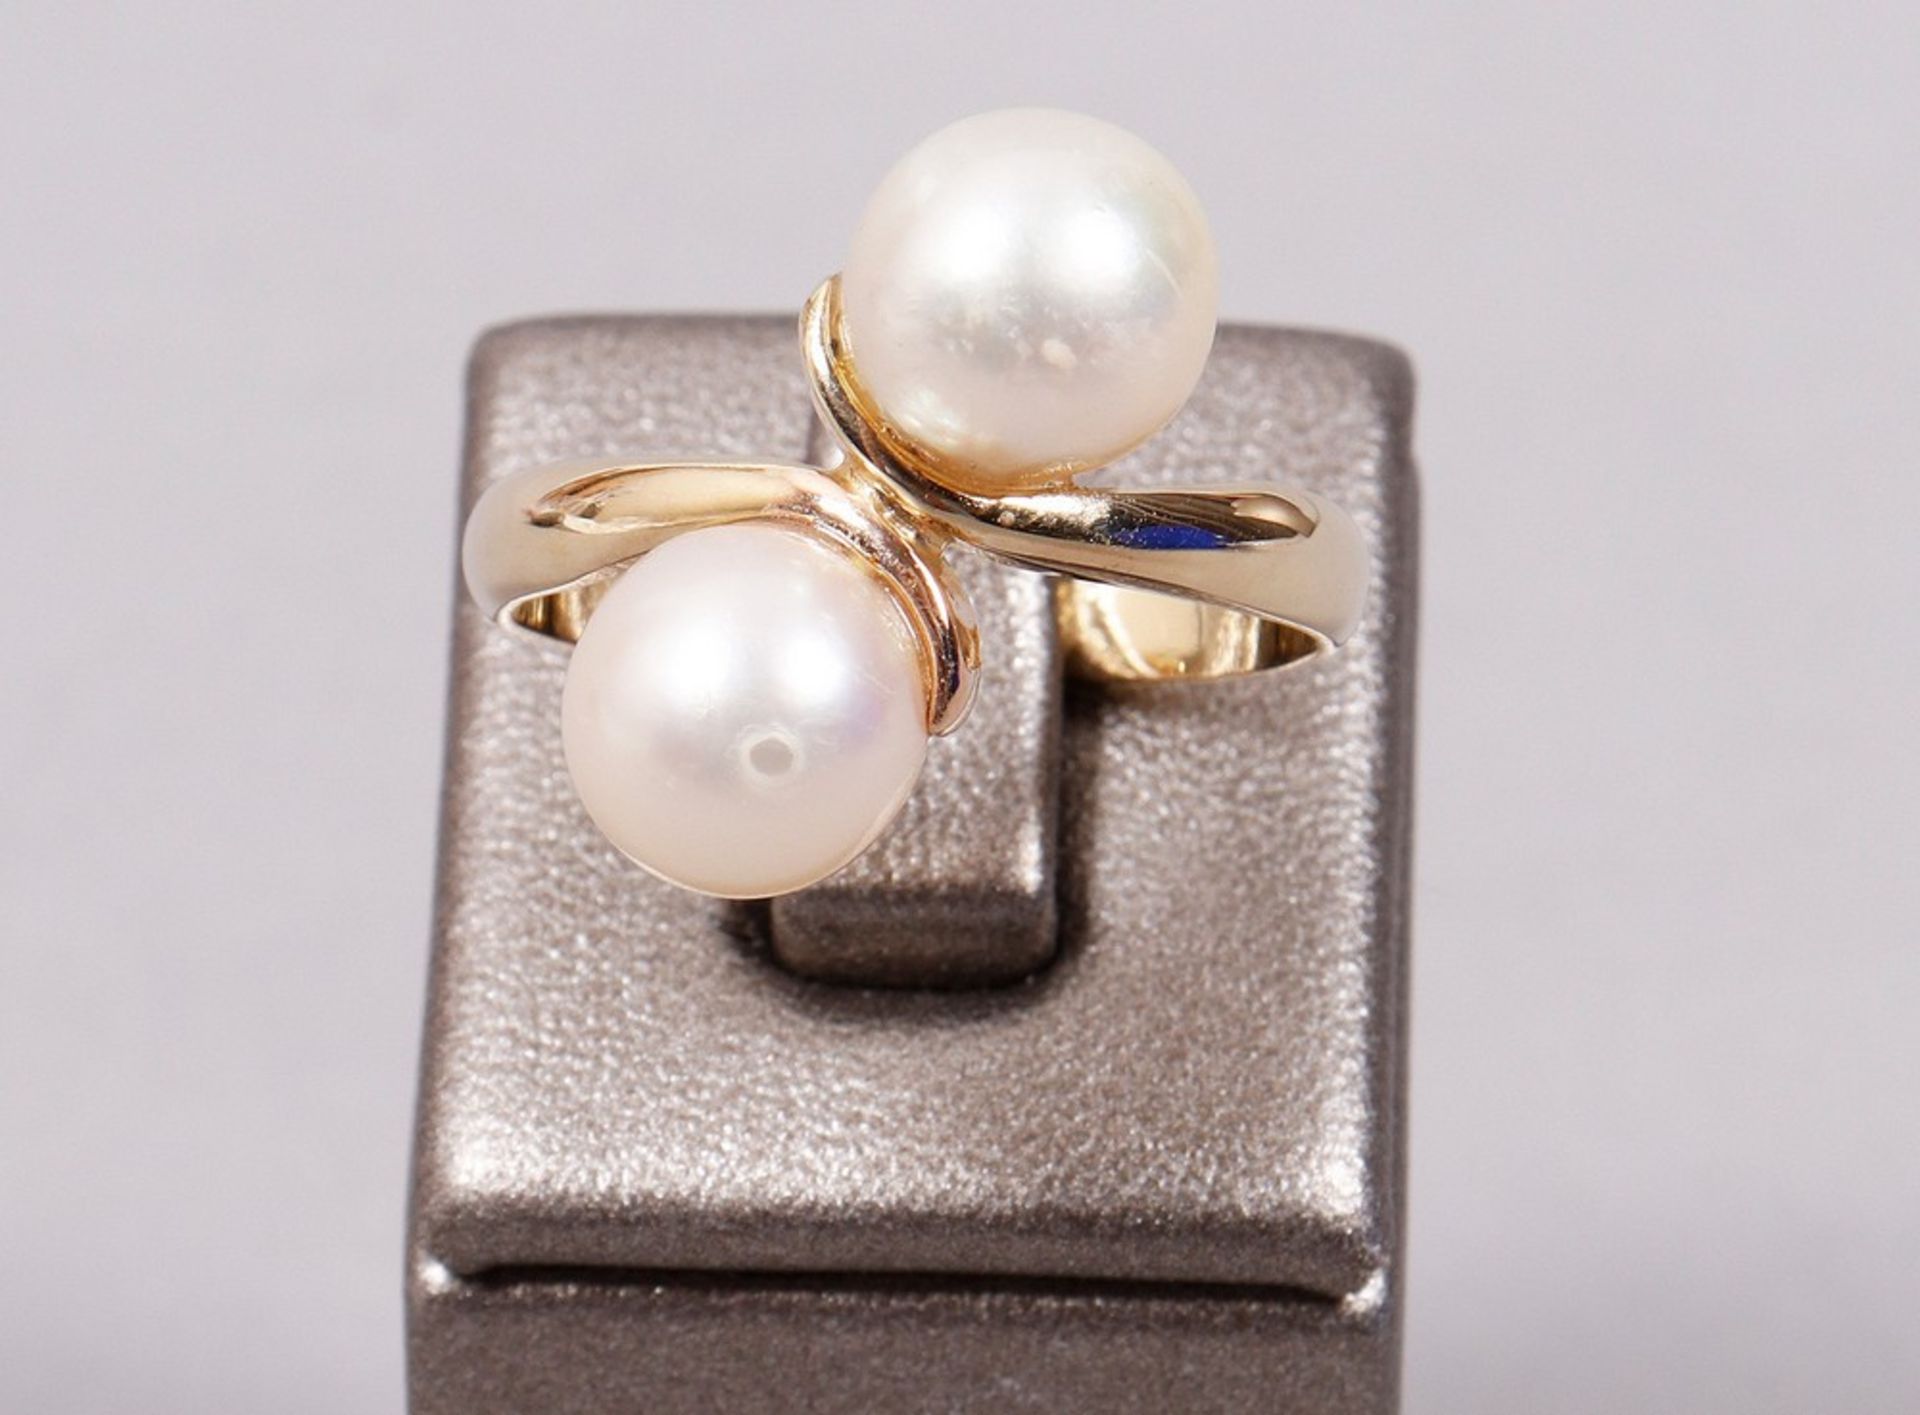 Pearl ring, 585 yellow gold, 20th C. - Image 2 of 4